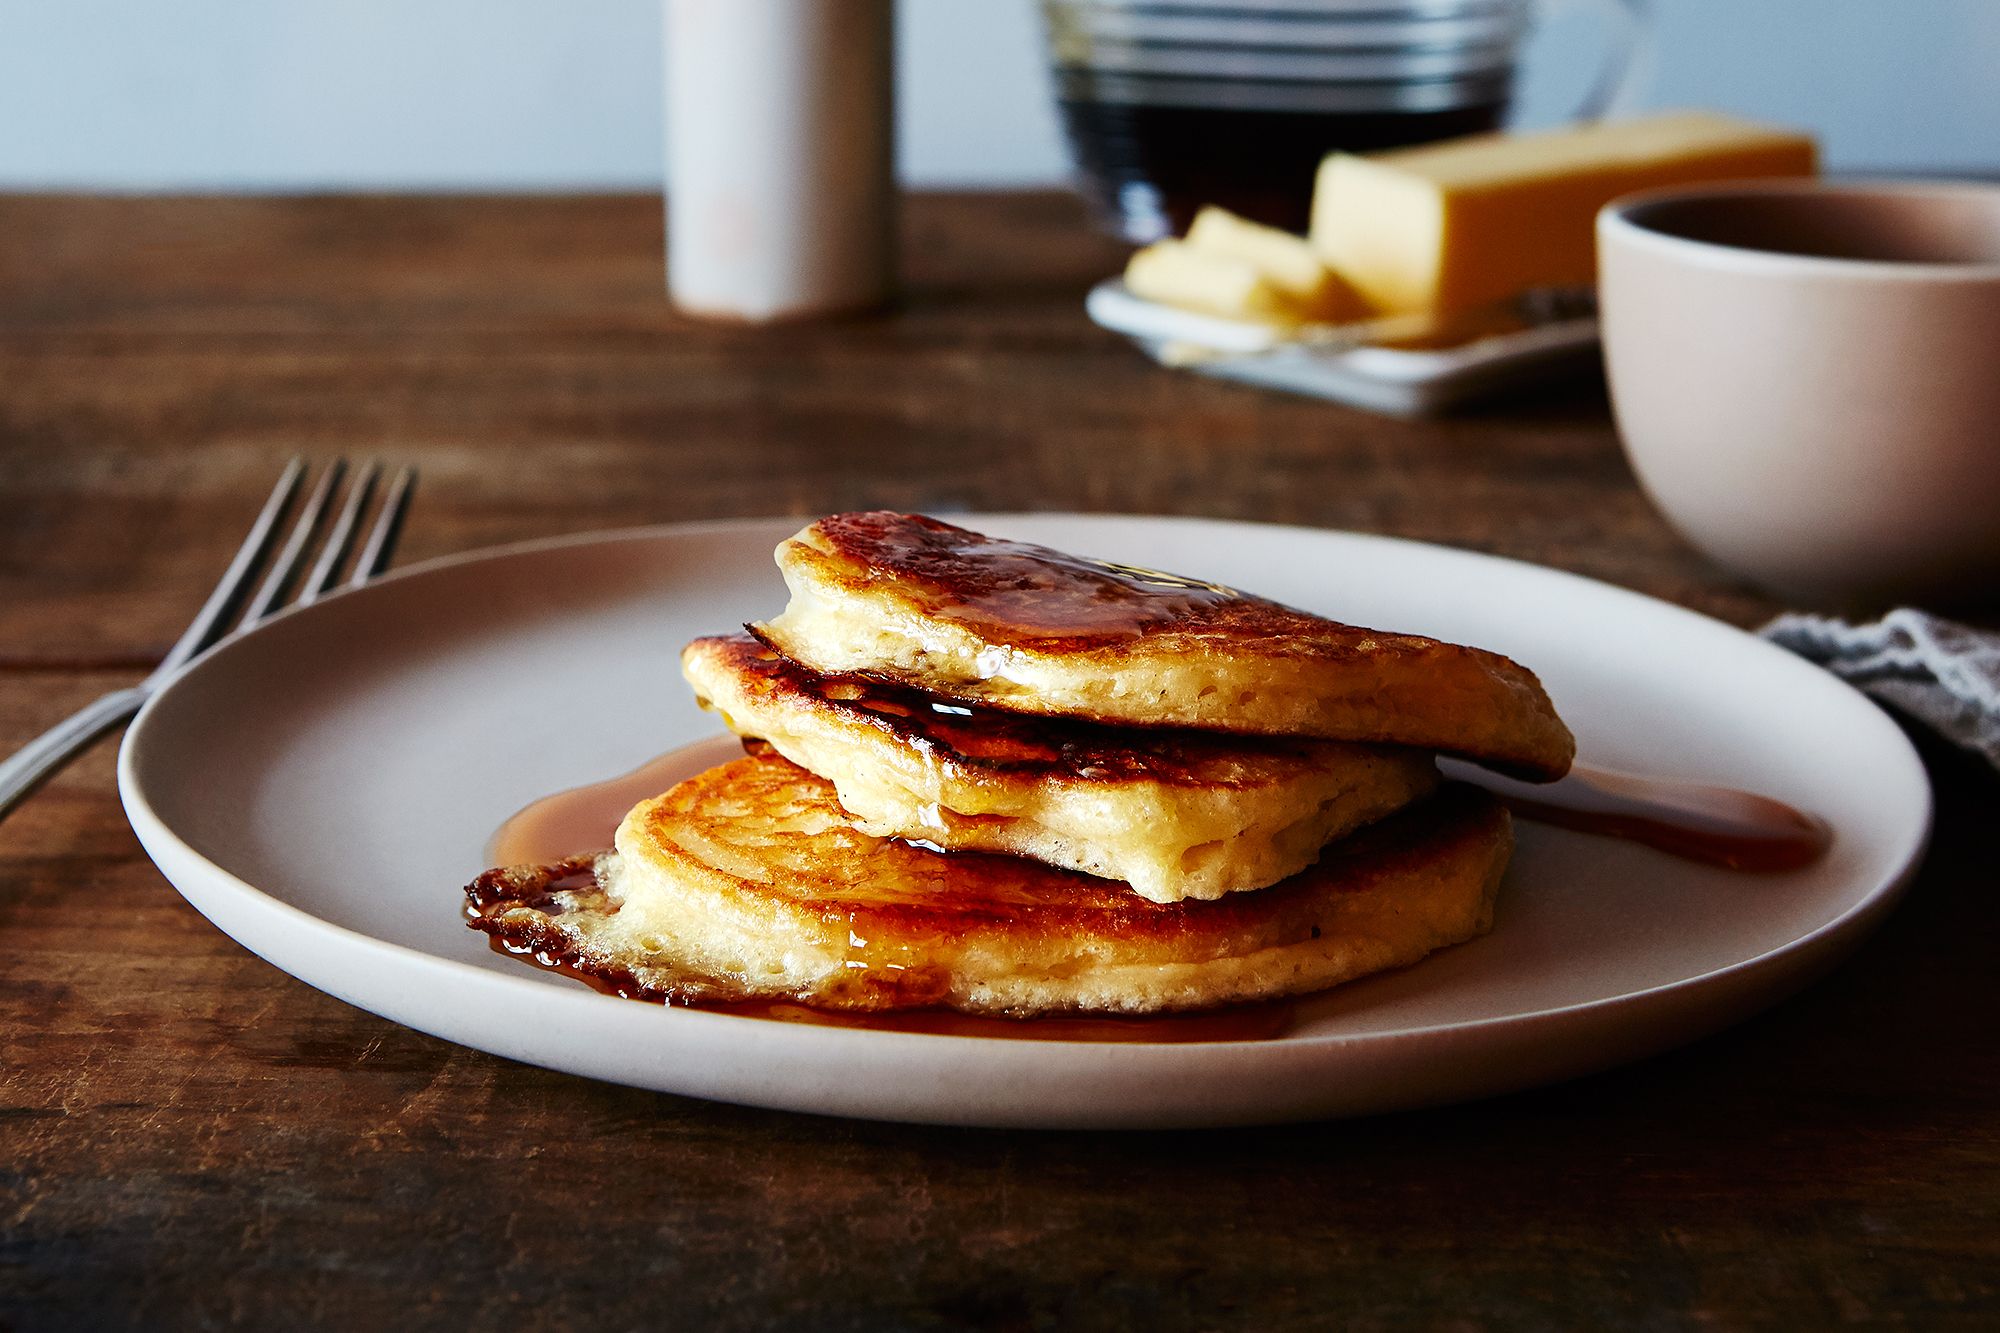 The Simplest-Ever Trick to Make Fluffy, Puffy Pancakes